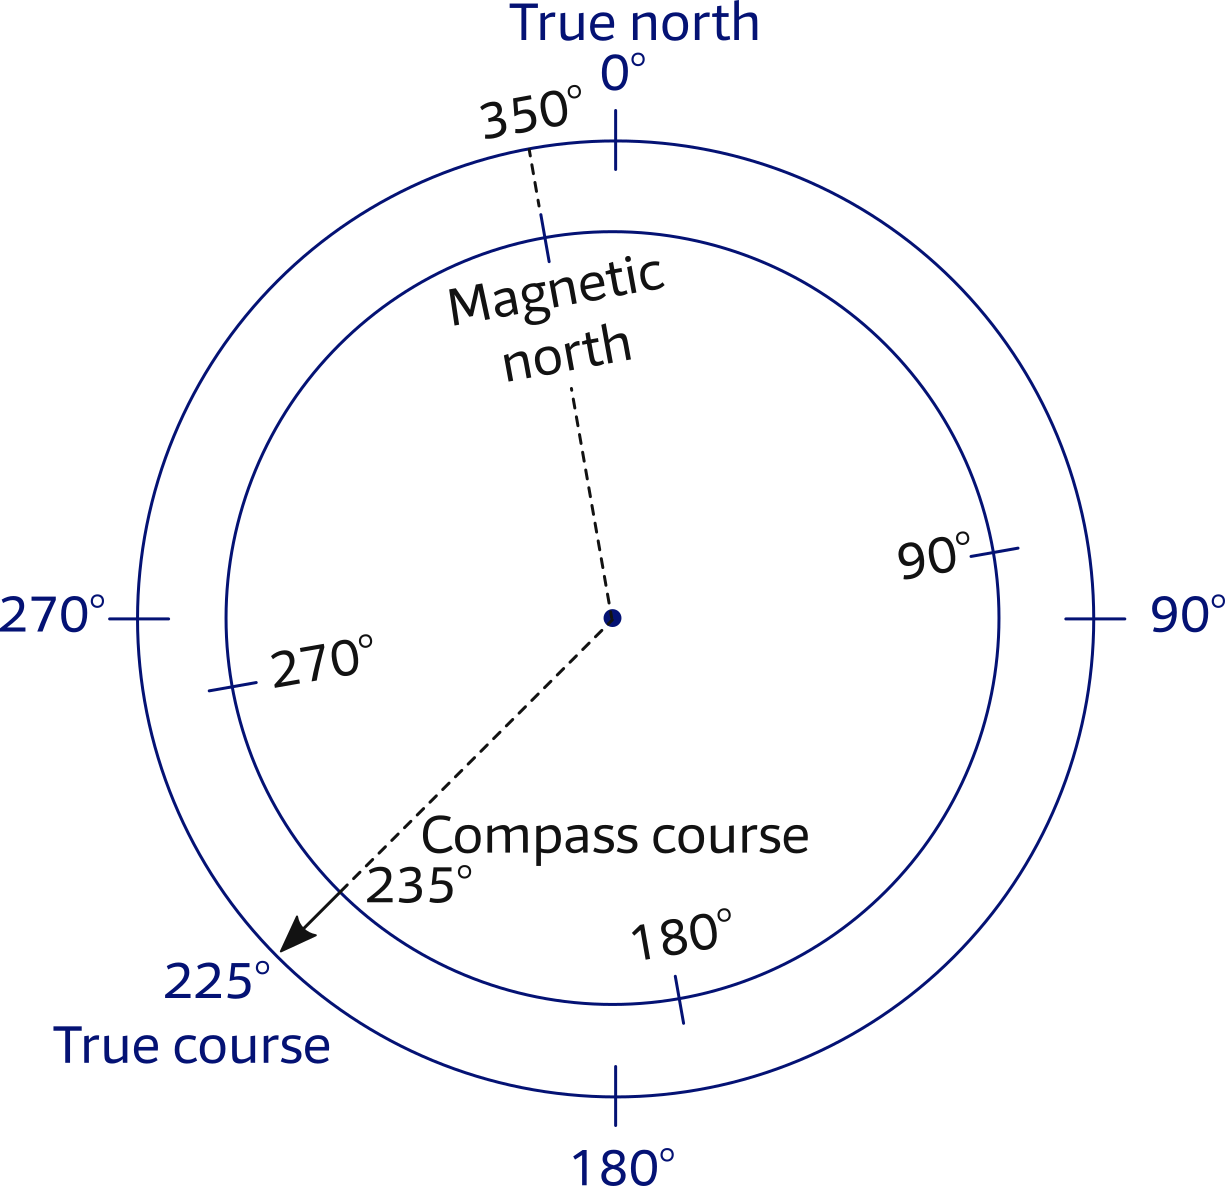 Difference between true course and magnetic course.